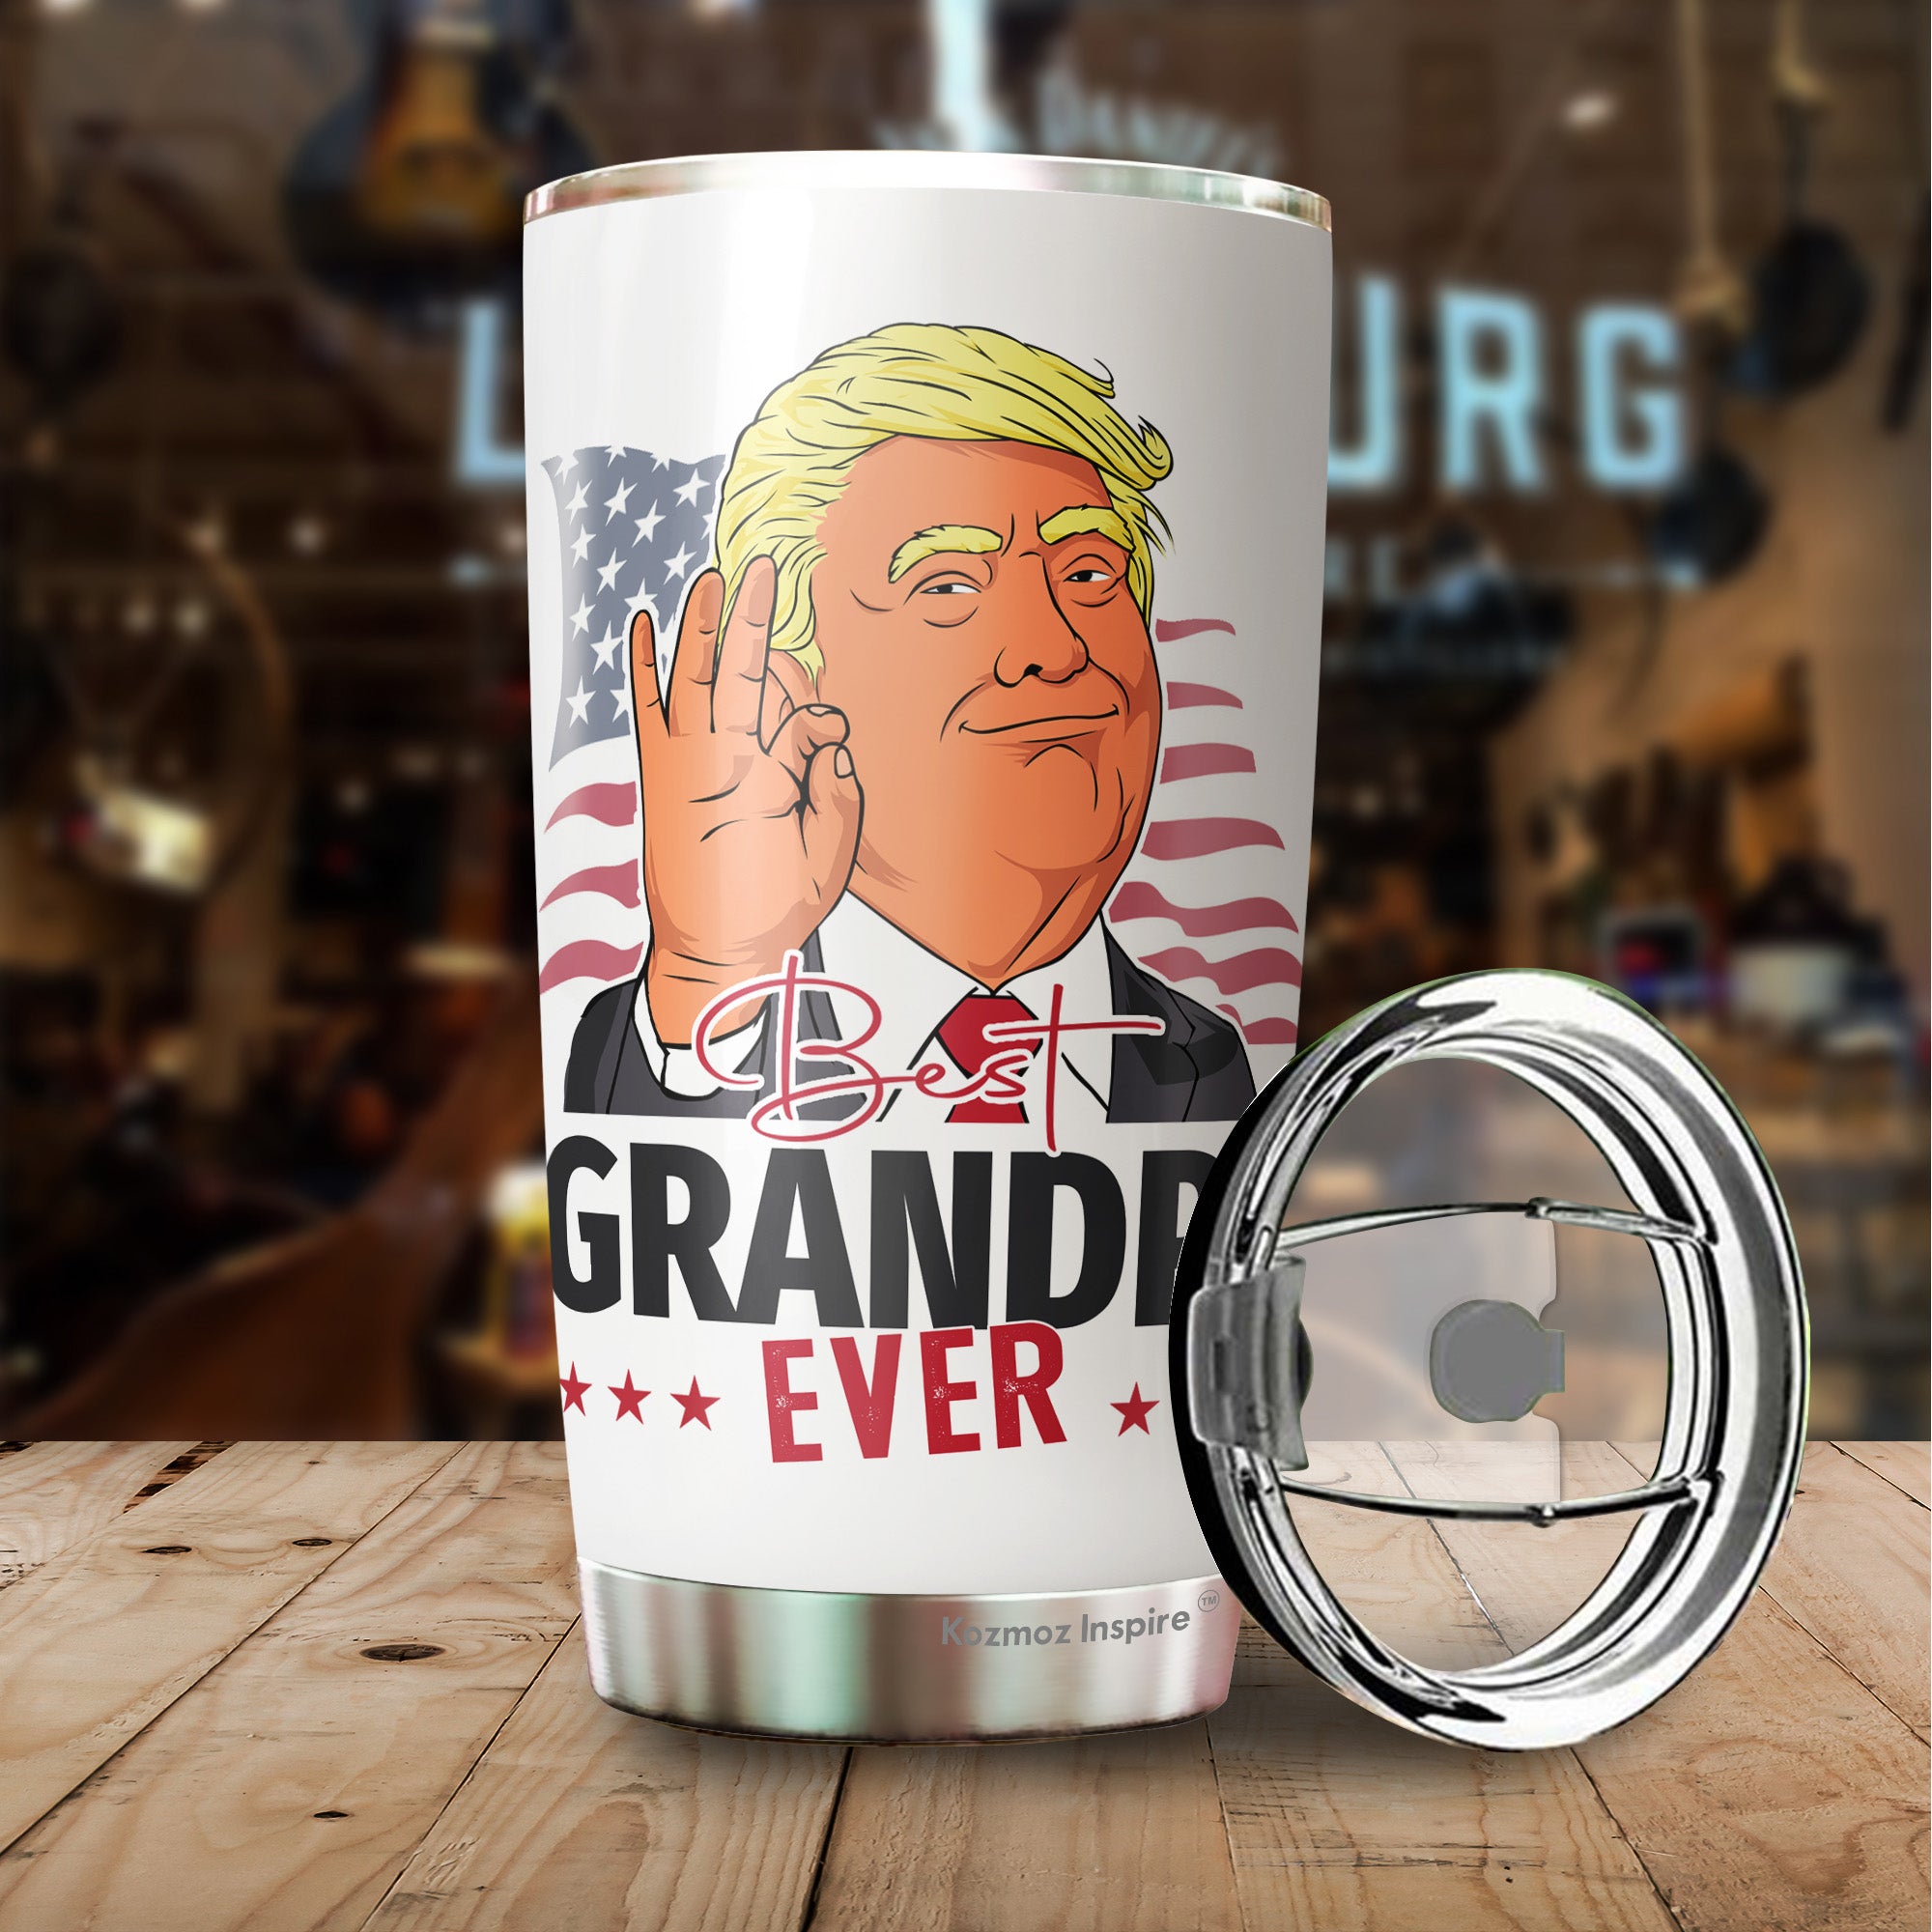 Gifts for Dad - Dad Joke Loading Funny Travel Coffee Tumbler Mug, Unique  Christmas, Birthday, Father's Day